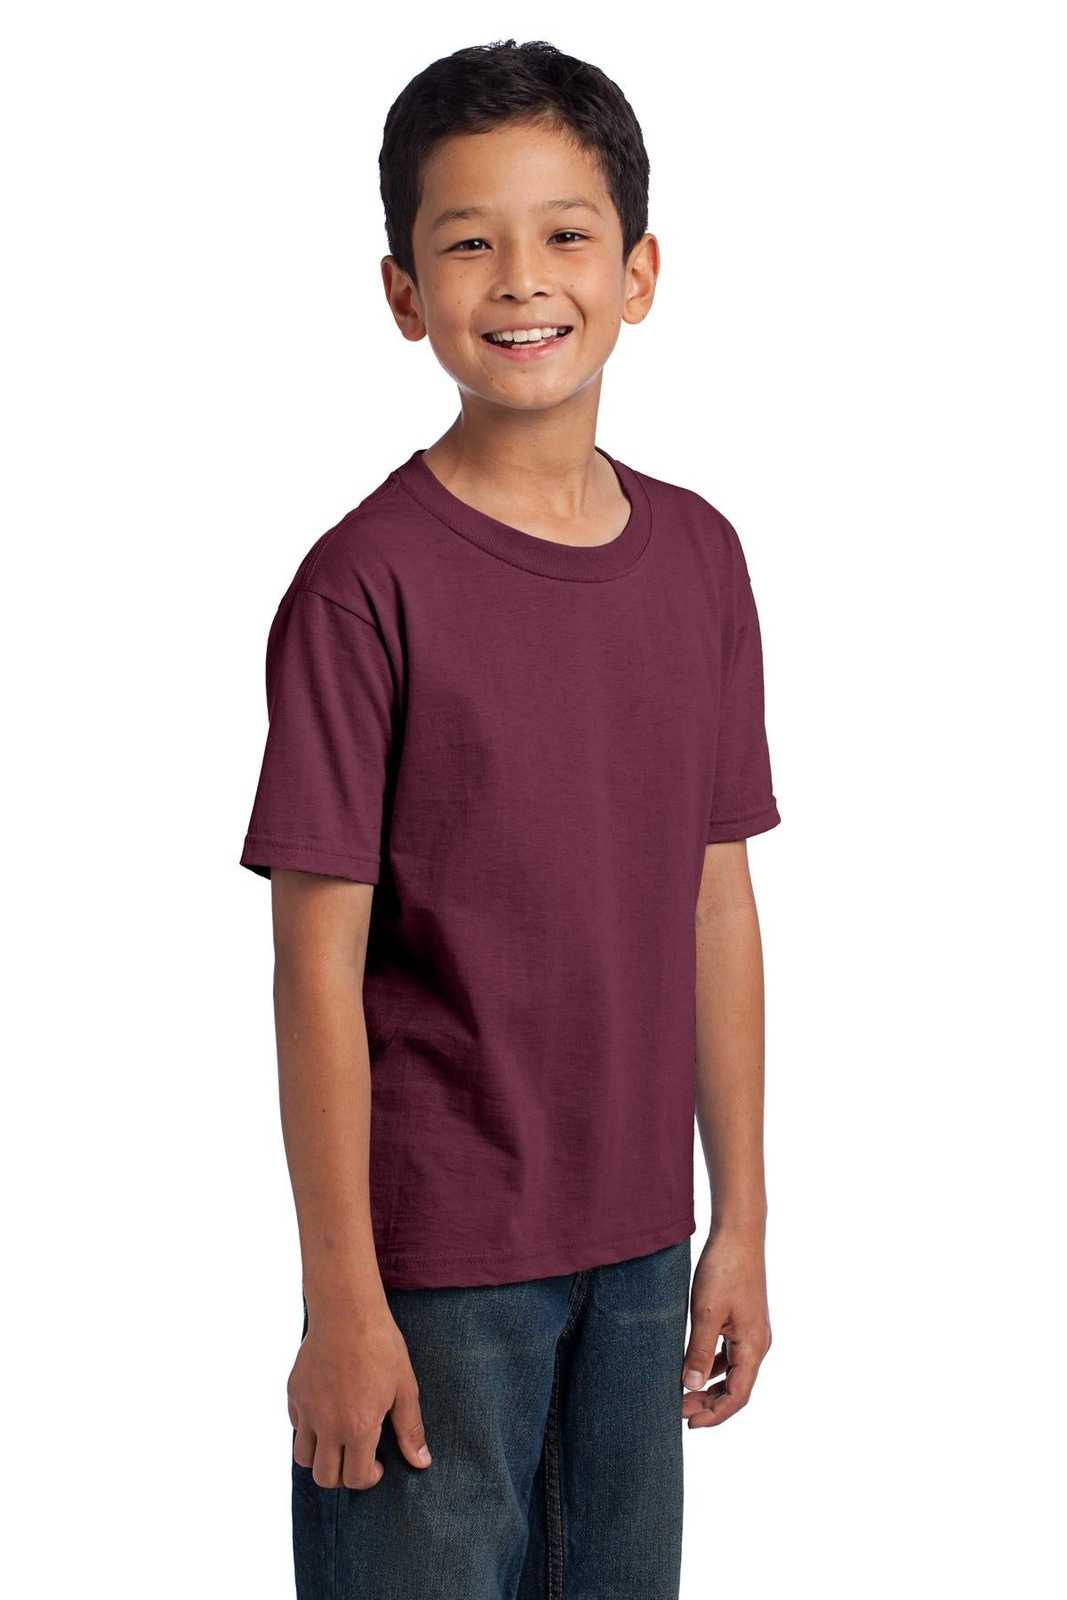 Fruit of the Loom 3930B Youth HD Cotton 100% Cotton T-Shirt - Maroon - HIT a Double